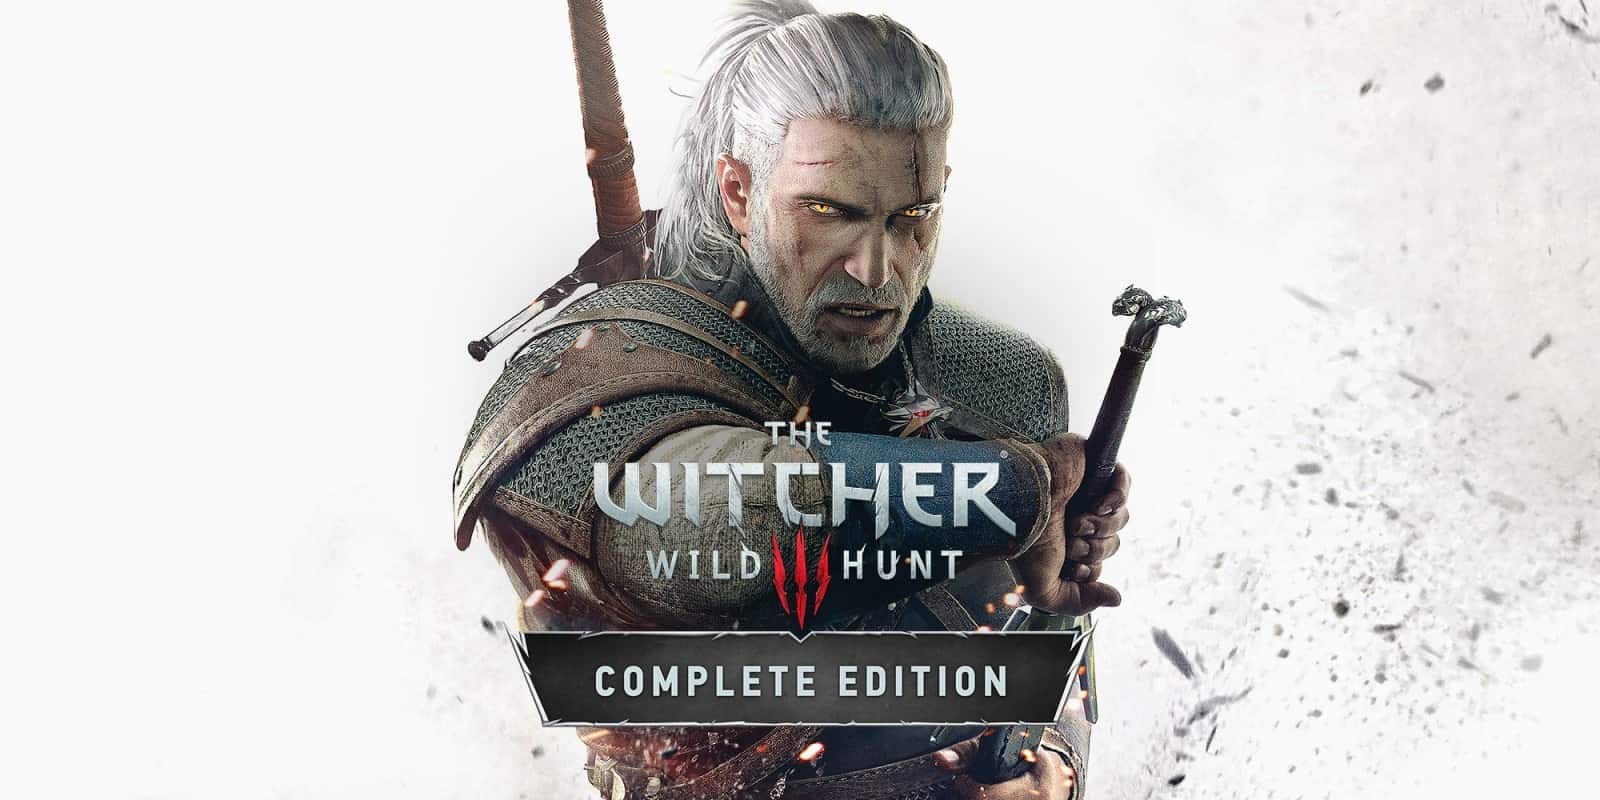 Free Games – Claim The Witcher 3 on PC if Already Own it On Console or Another PC Launcher